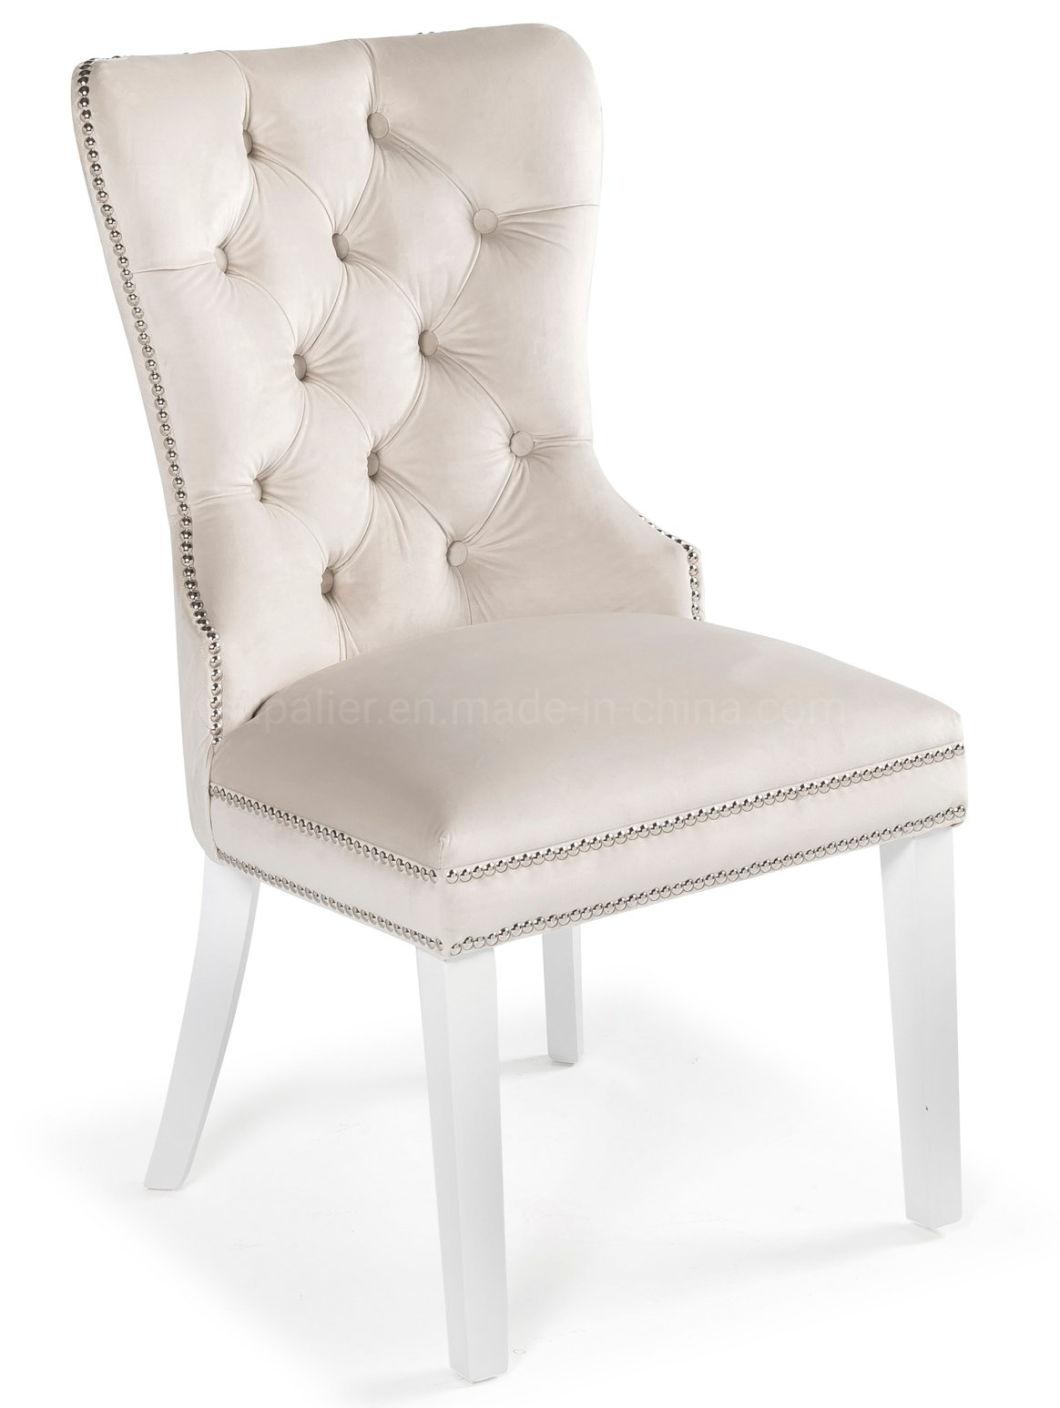 Modern European Style Creamy-White Fabric Dining Chair with Knocker Back